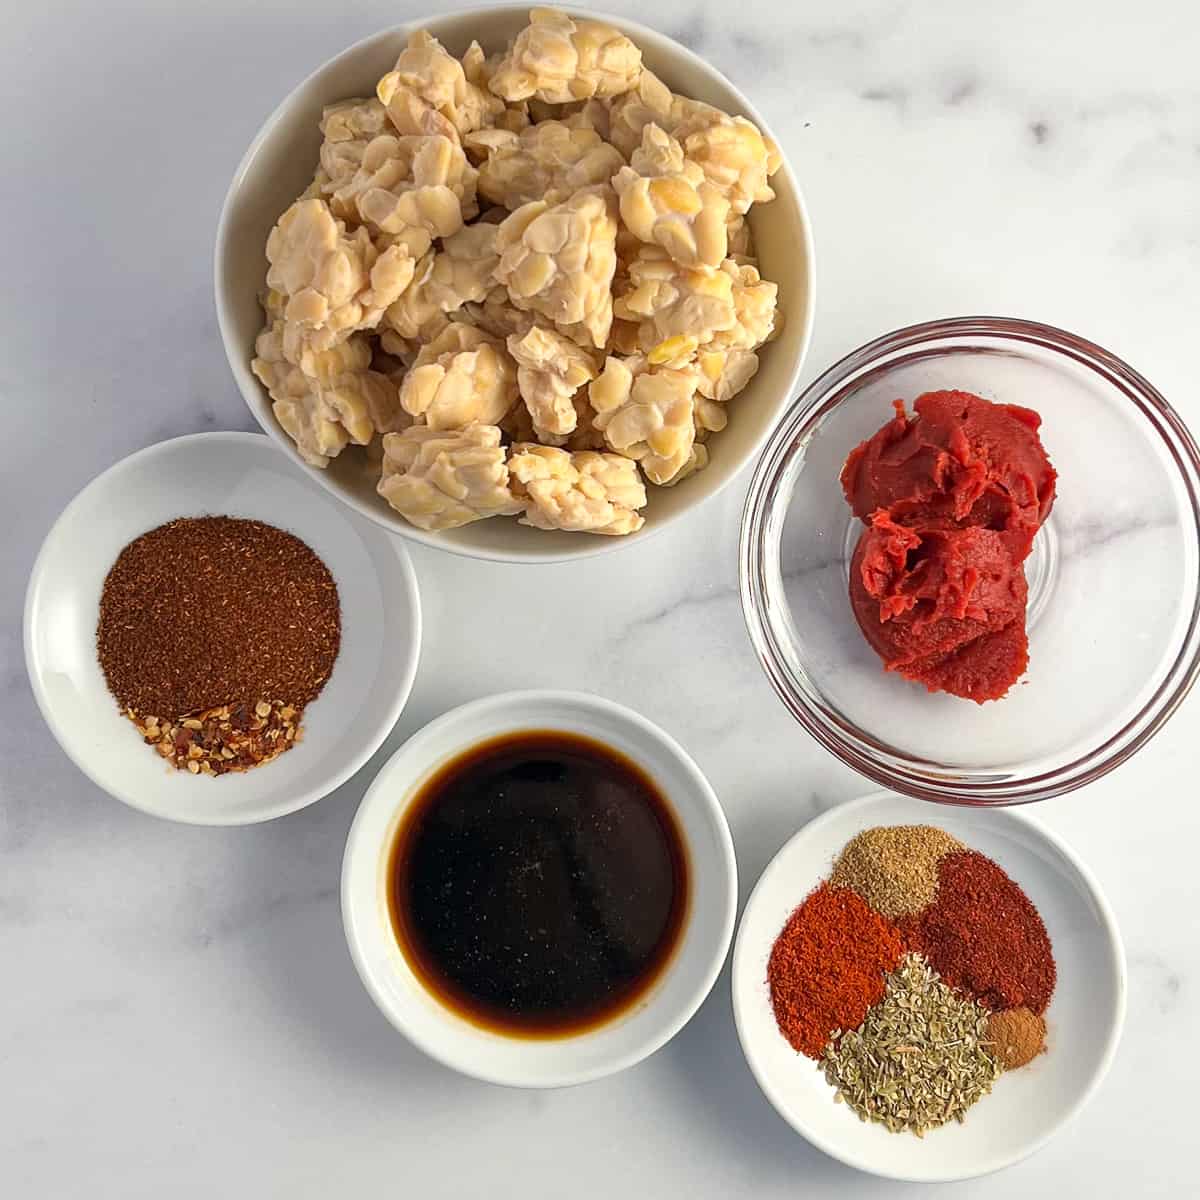 Top view ingredients for tempeh chorizo: tempeh, tomato paste, smoked and sweet paprika, oregano, cinnamon, cumin, chili powder, crushed red pepper, coconut aminos